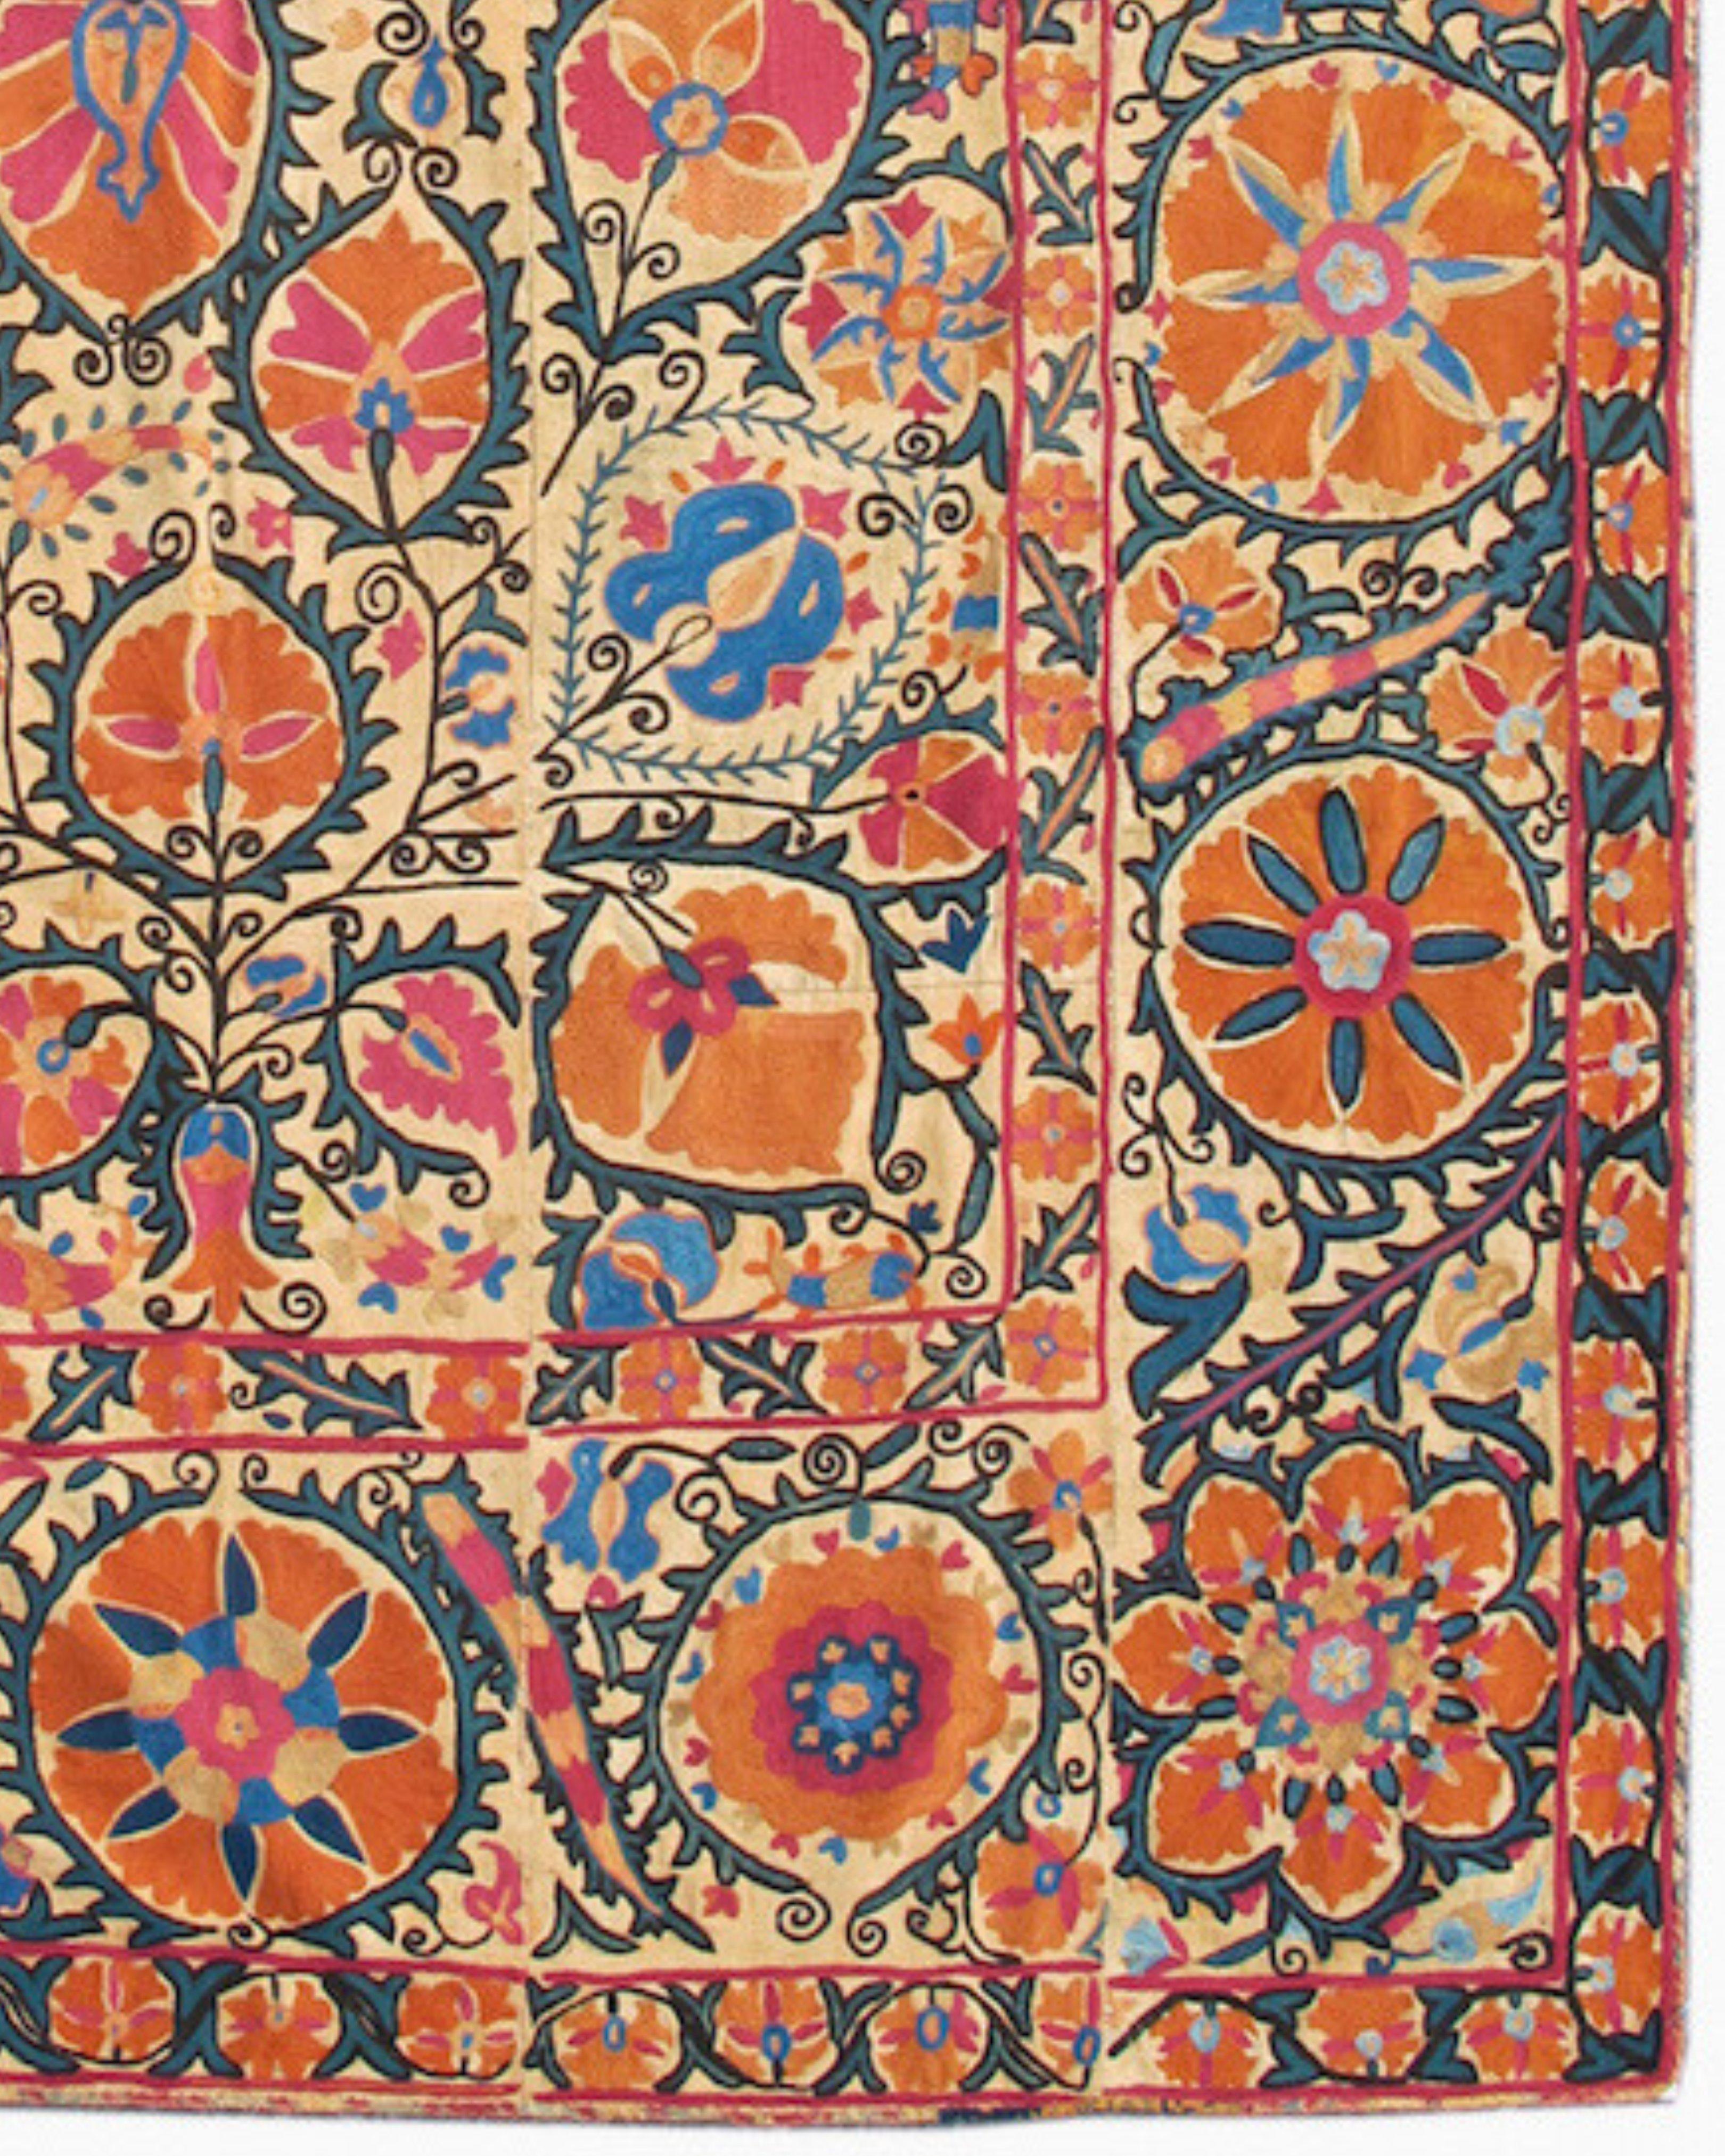 Antique Uzbek Bokhara Suzani Wall-Hanging Tapestry, Mid-19th Century For Sale 2